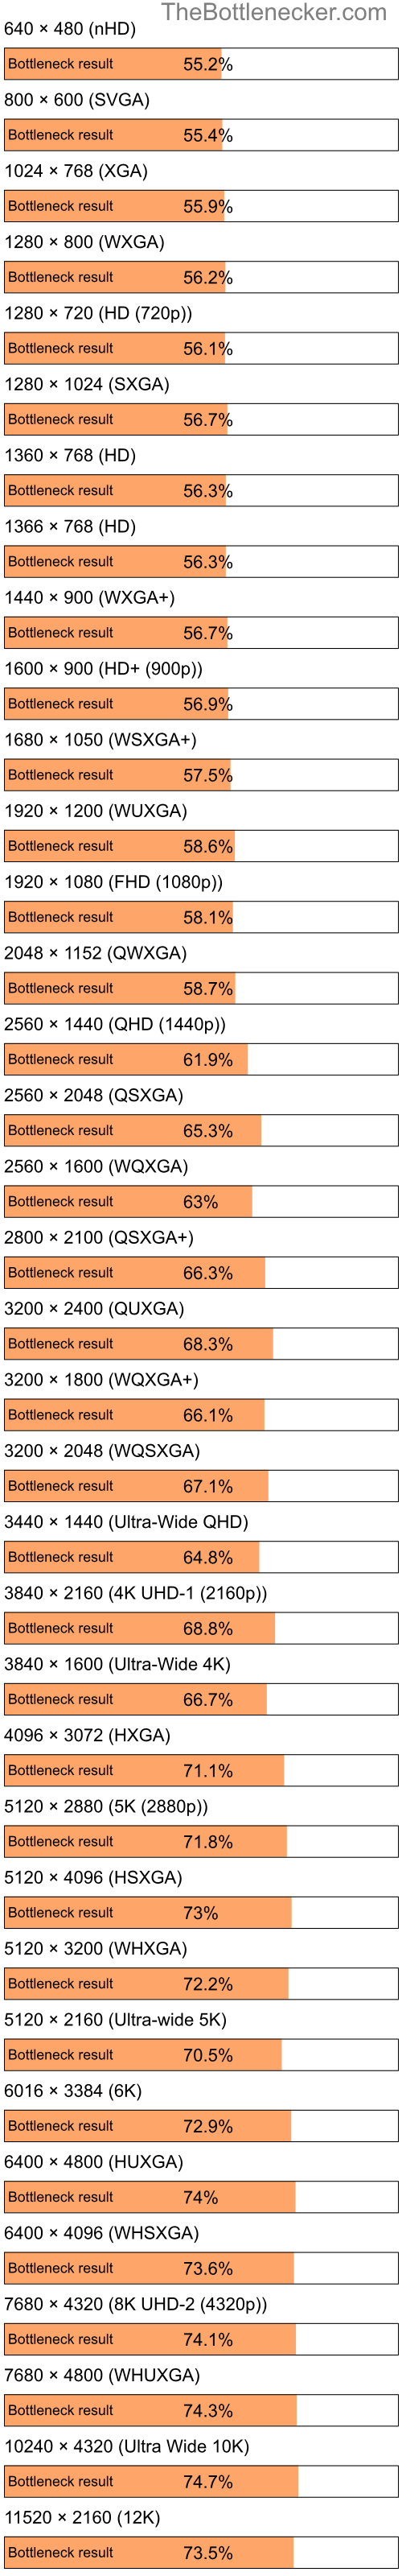 Bottleneck results by resolution for Intel Atom Z520 and NVIDIA Quadro FX 360M in Processor Intense Tasks